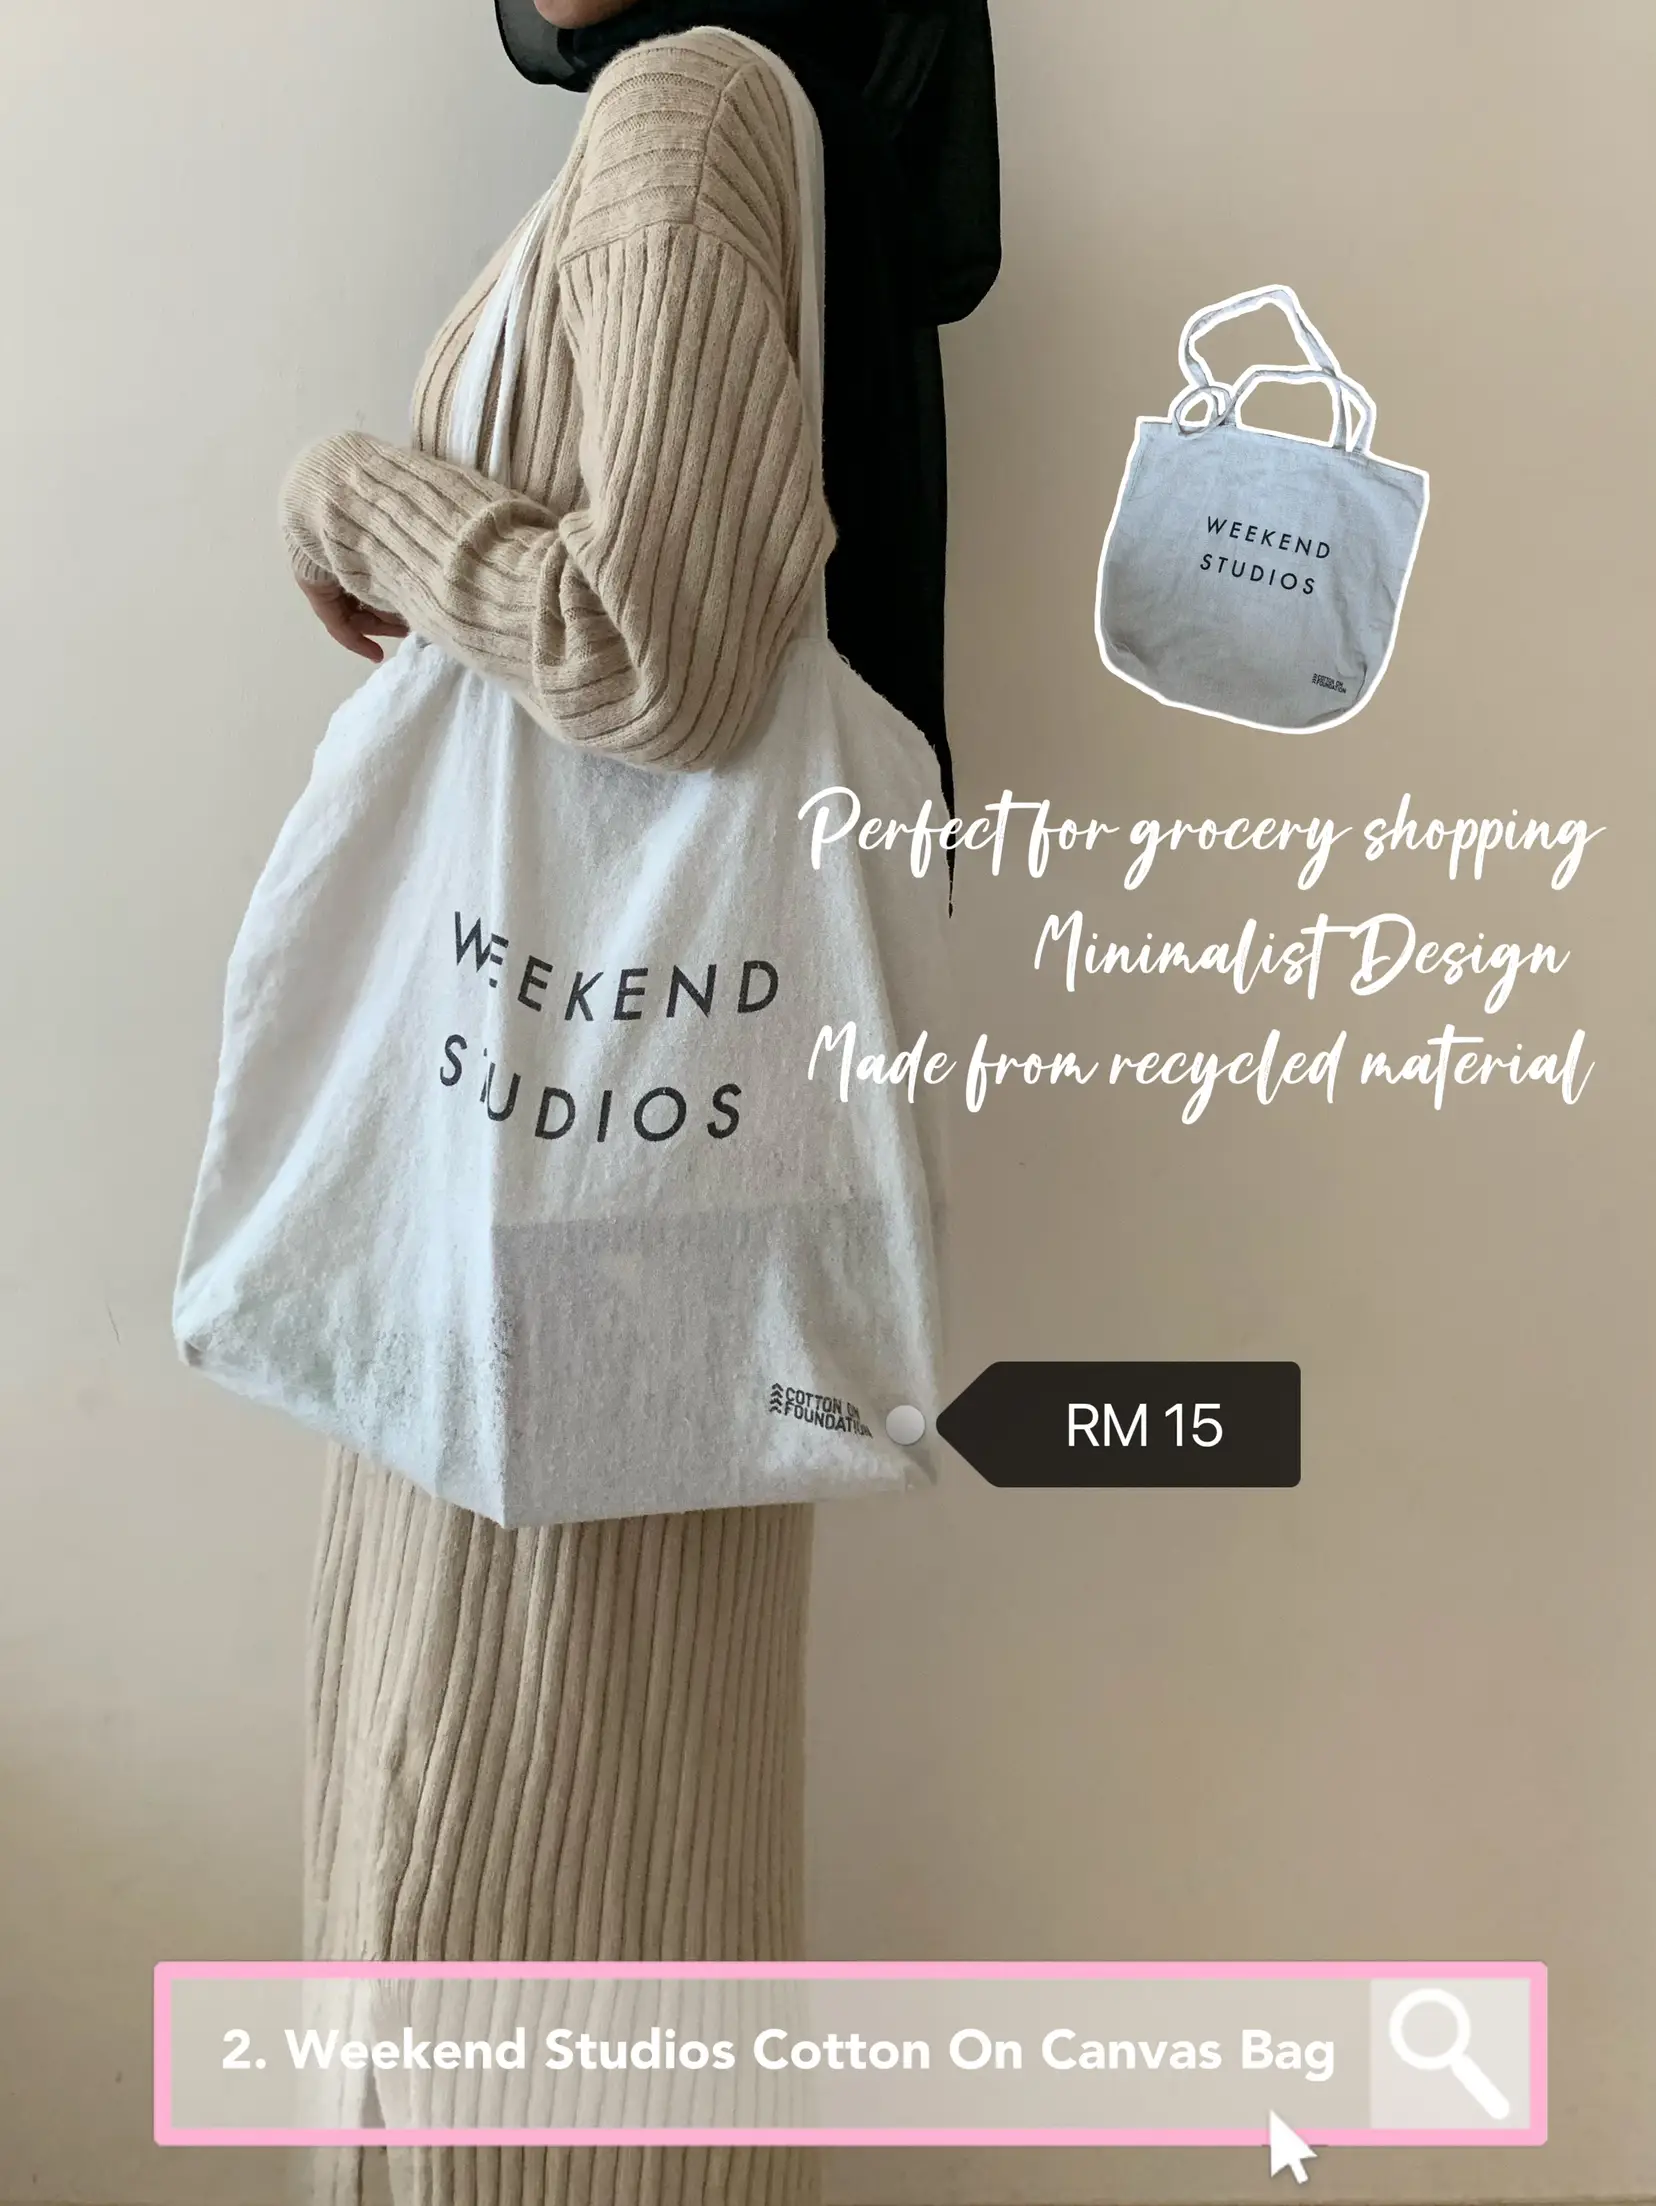 CUTE COLLEGE TOTE BAG FROM H&M YOU MUST HAVE, Gallery posted by Faznadia